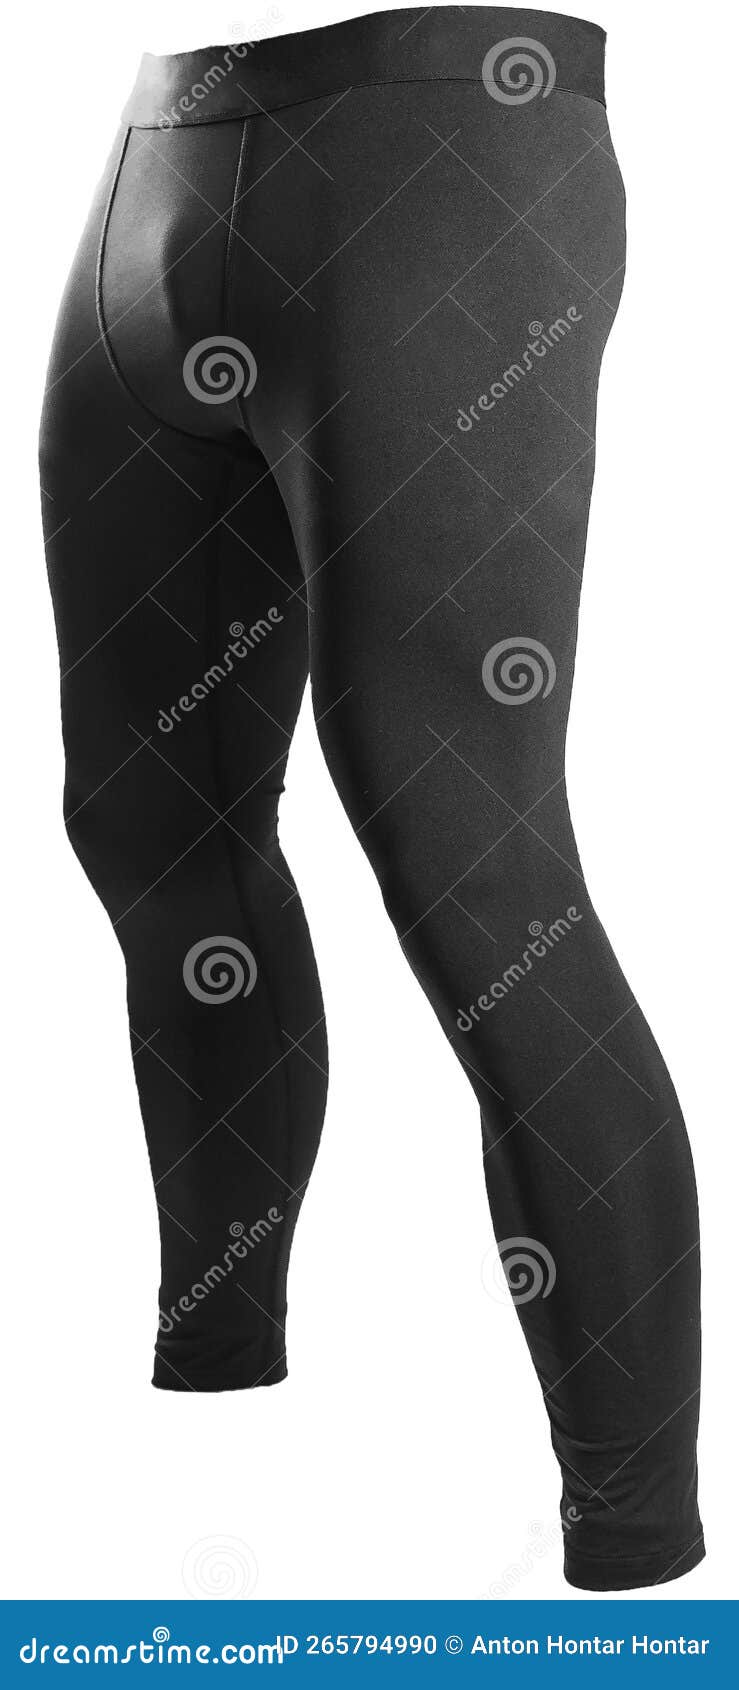 https://thumbs.dreamstime.com/z/black-compression-termo-leggings-mockup-body-athletic-man-isolated-white-background-set-sportswear-workout-265794990.jpg